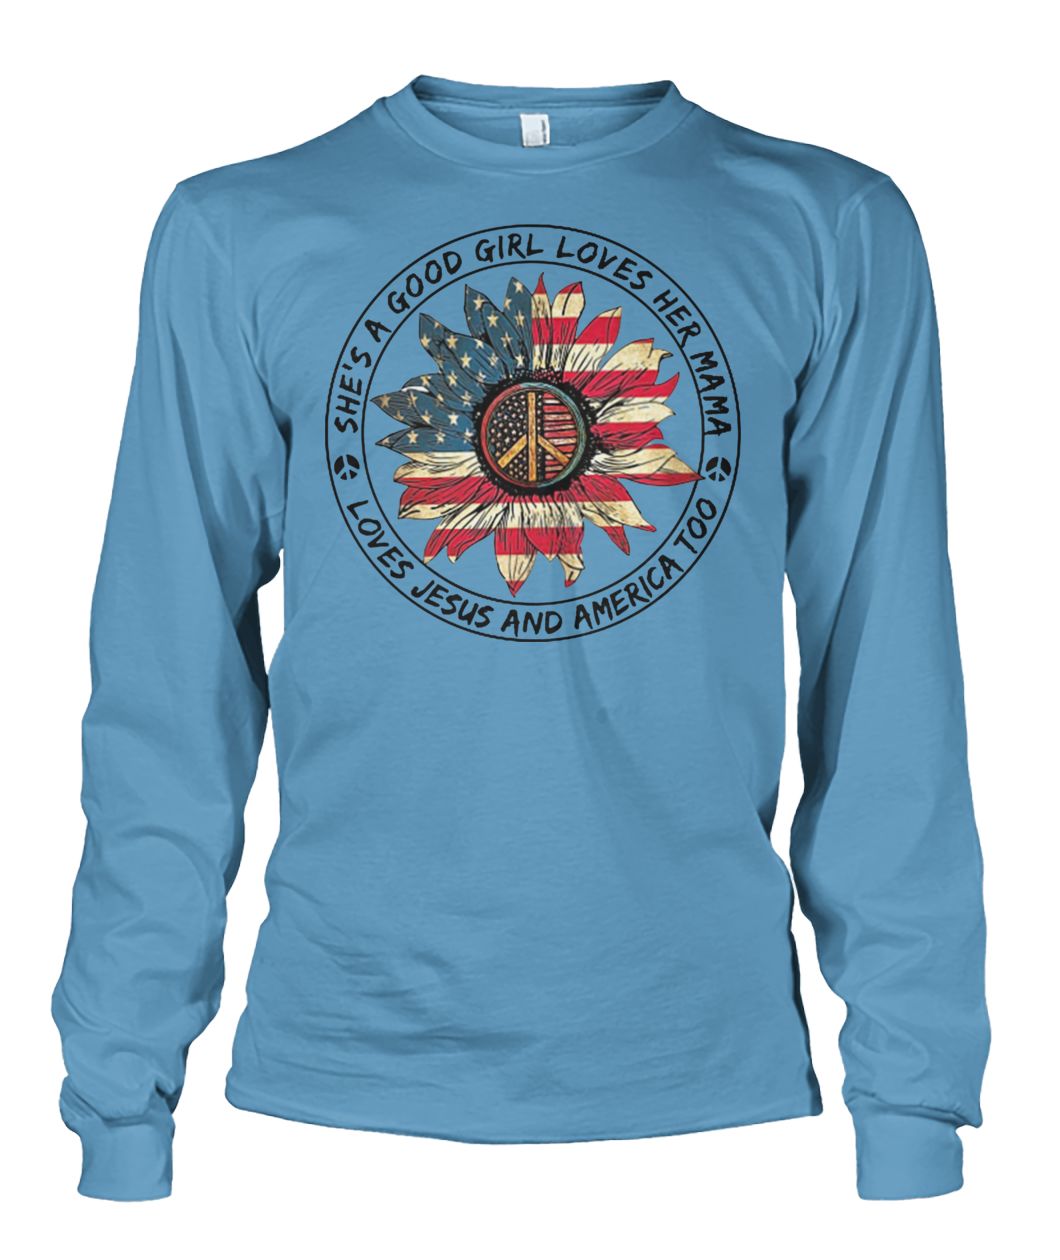 She's a good girl loves her mama loves jesus and america too hippie unisex long sleeve